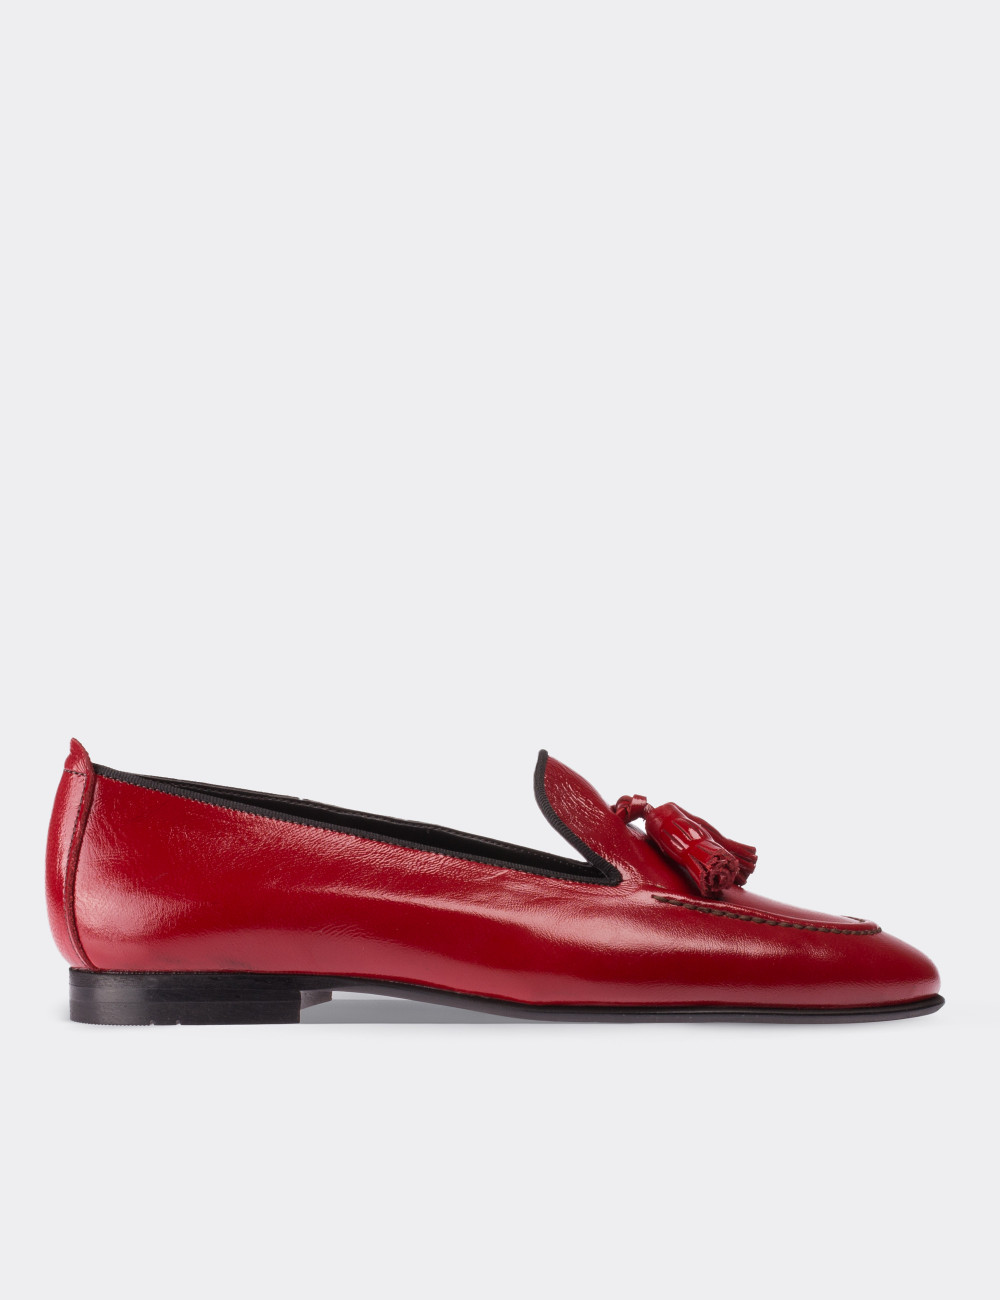 Red Patent Leather Loafers - 01619ZKRMM01